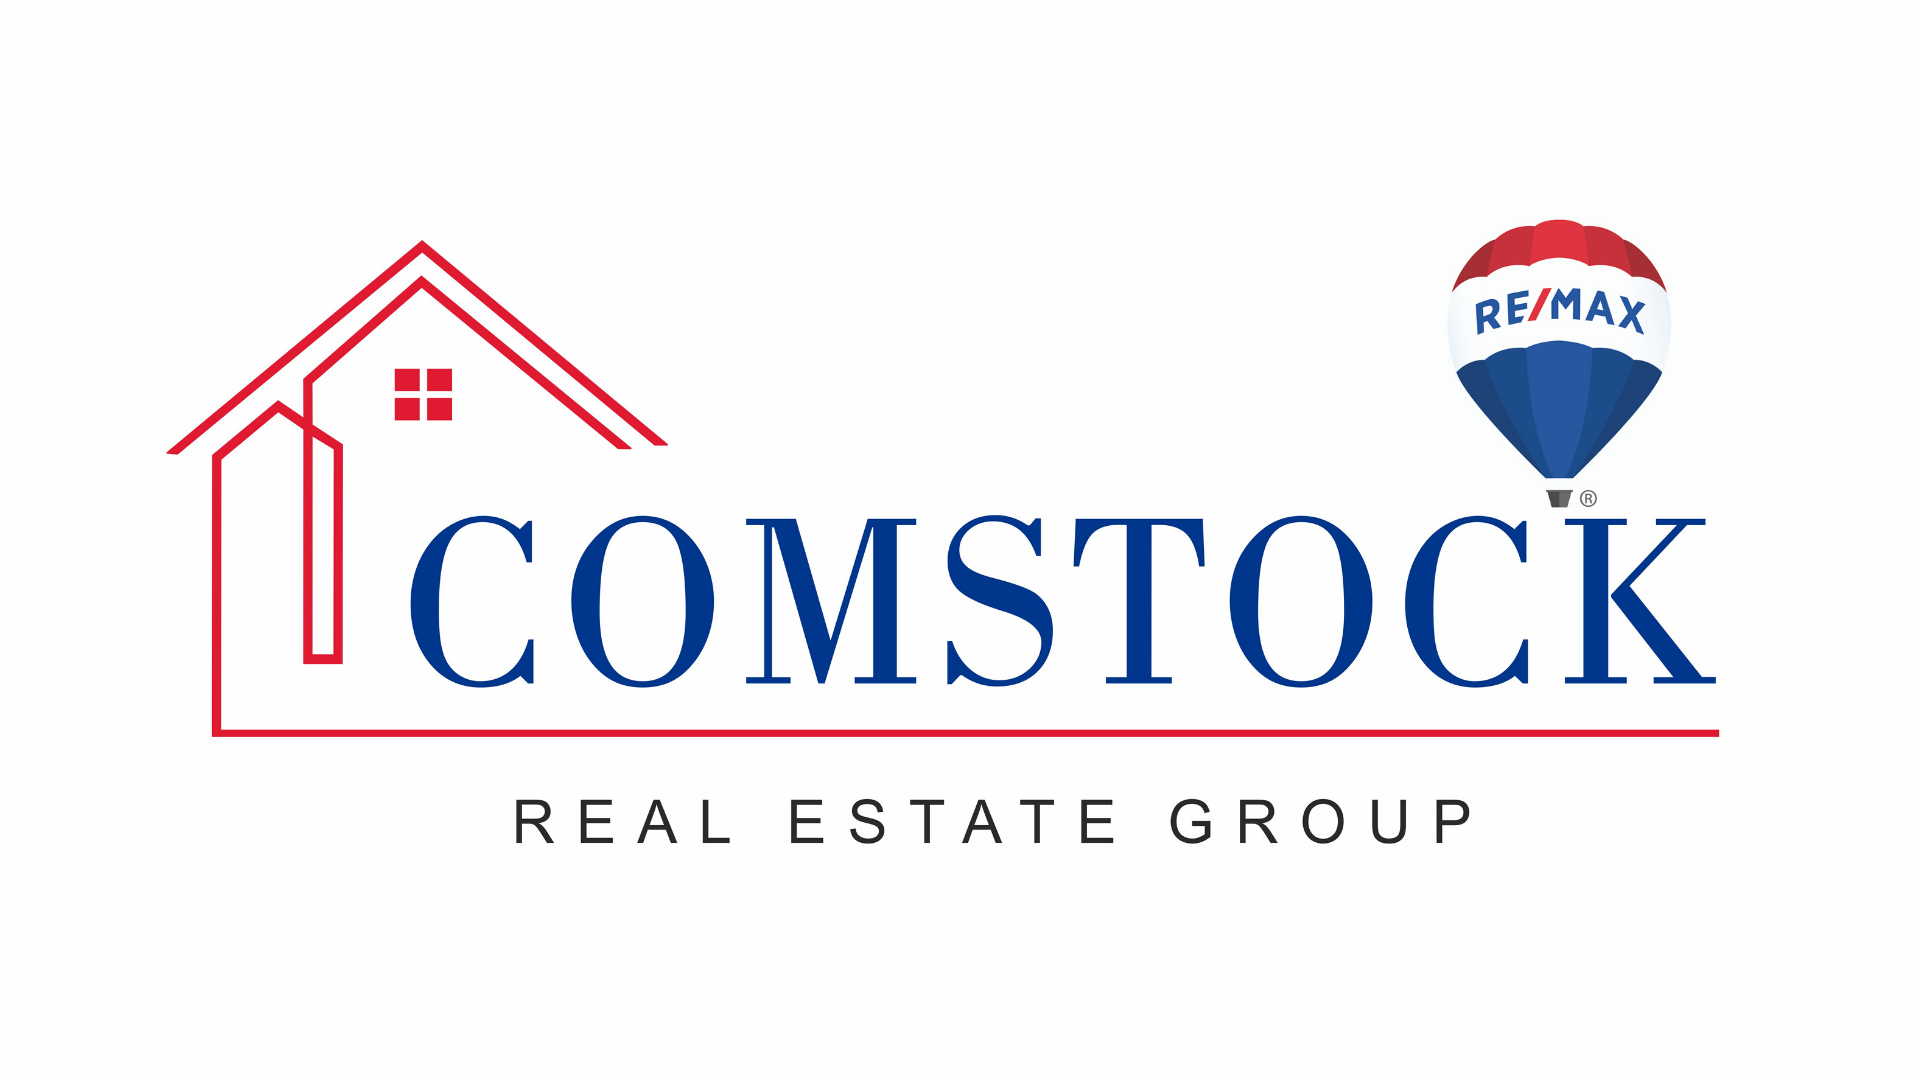 The Comstock Real Estate Group